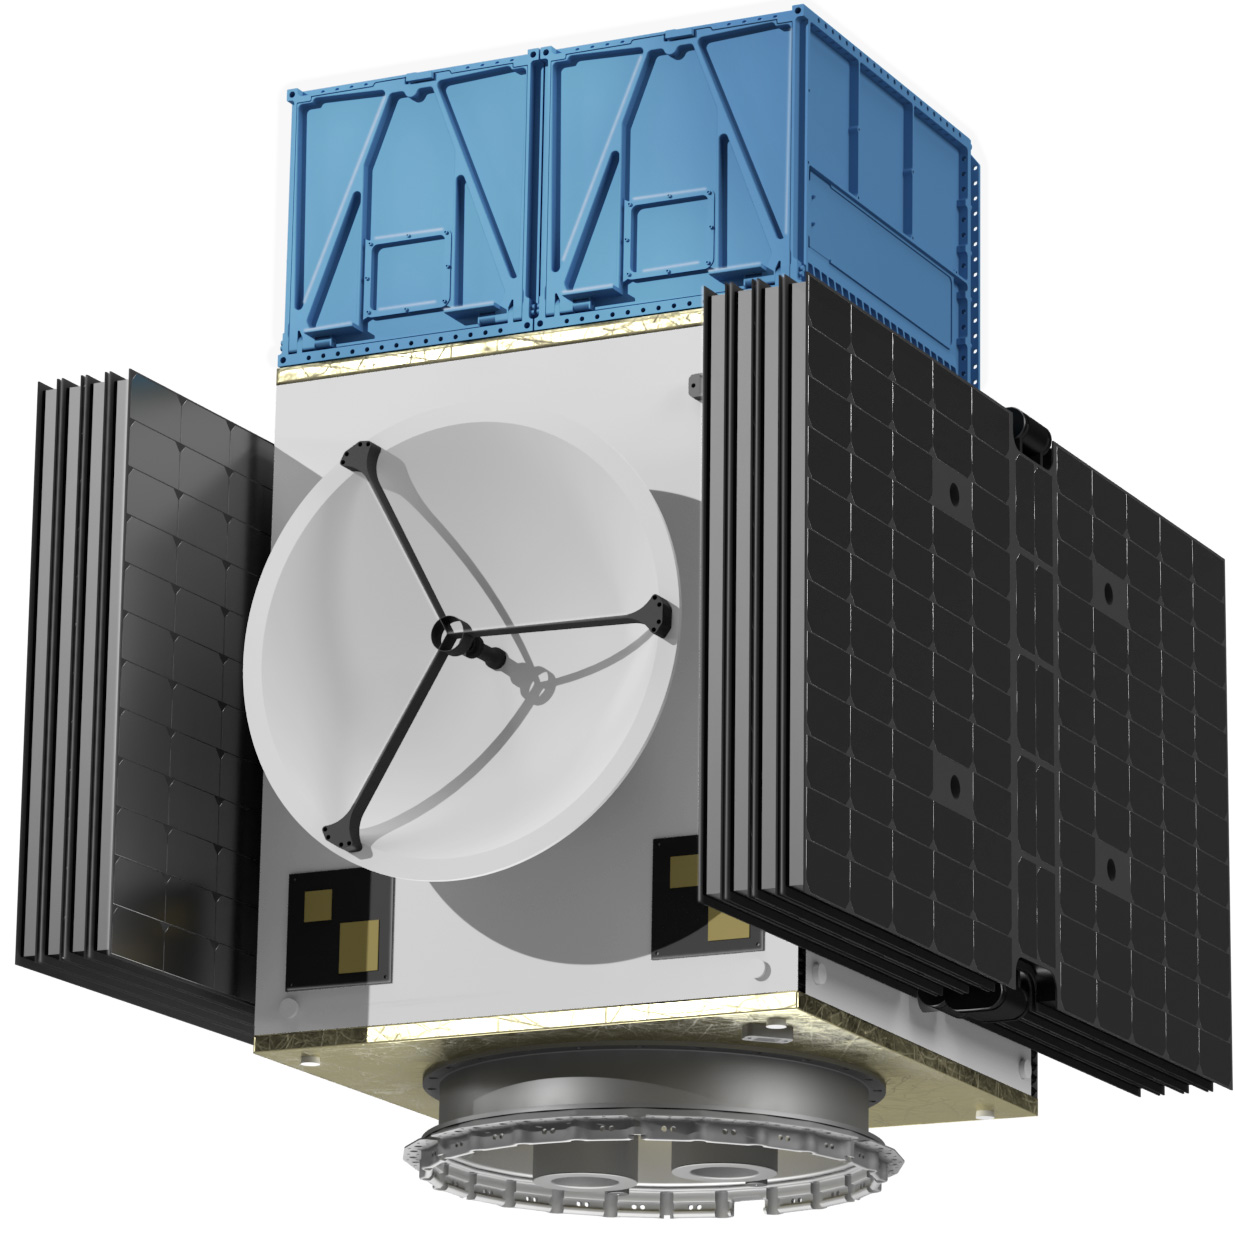 The MULTIPURPOSE ELECTRIC SATELLITE PLATFORM ESKIMO shown with folded solar wings at an isometric view from the side. On top of the satellite, 1-2 optional CubeSat Dispensers are attached instead of a payload. The dispensers have bright blue color and resemble structural boxes that can be opened to throw out the small satellites.